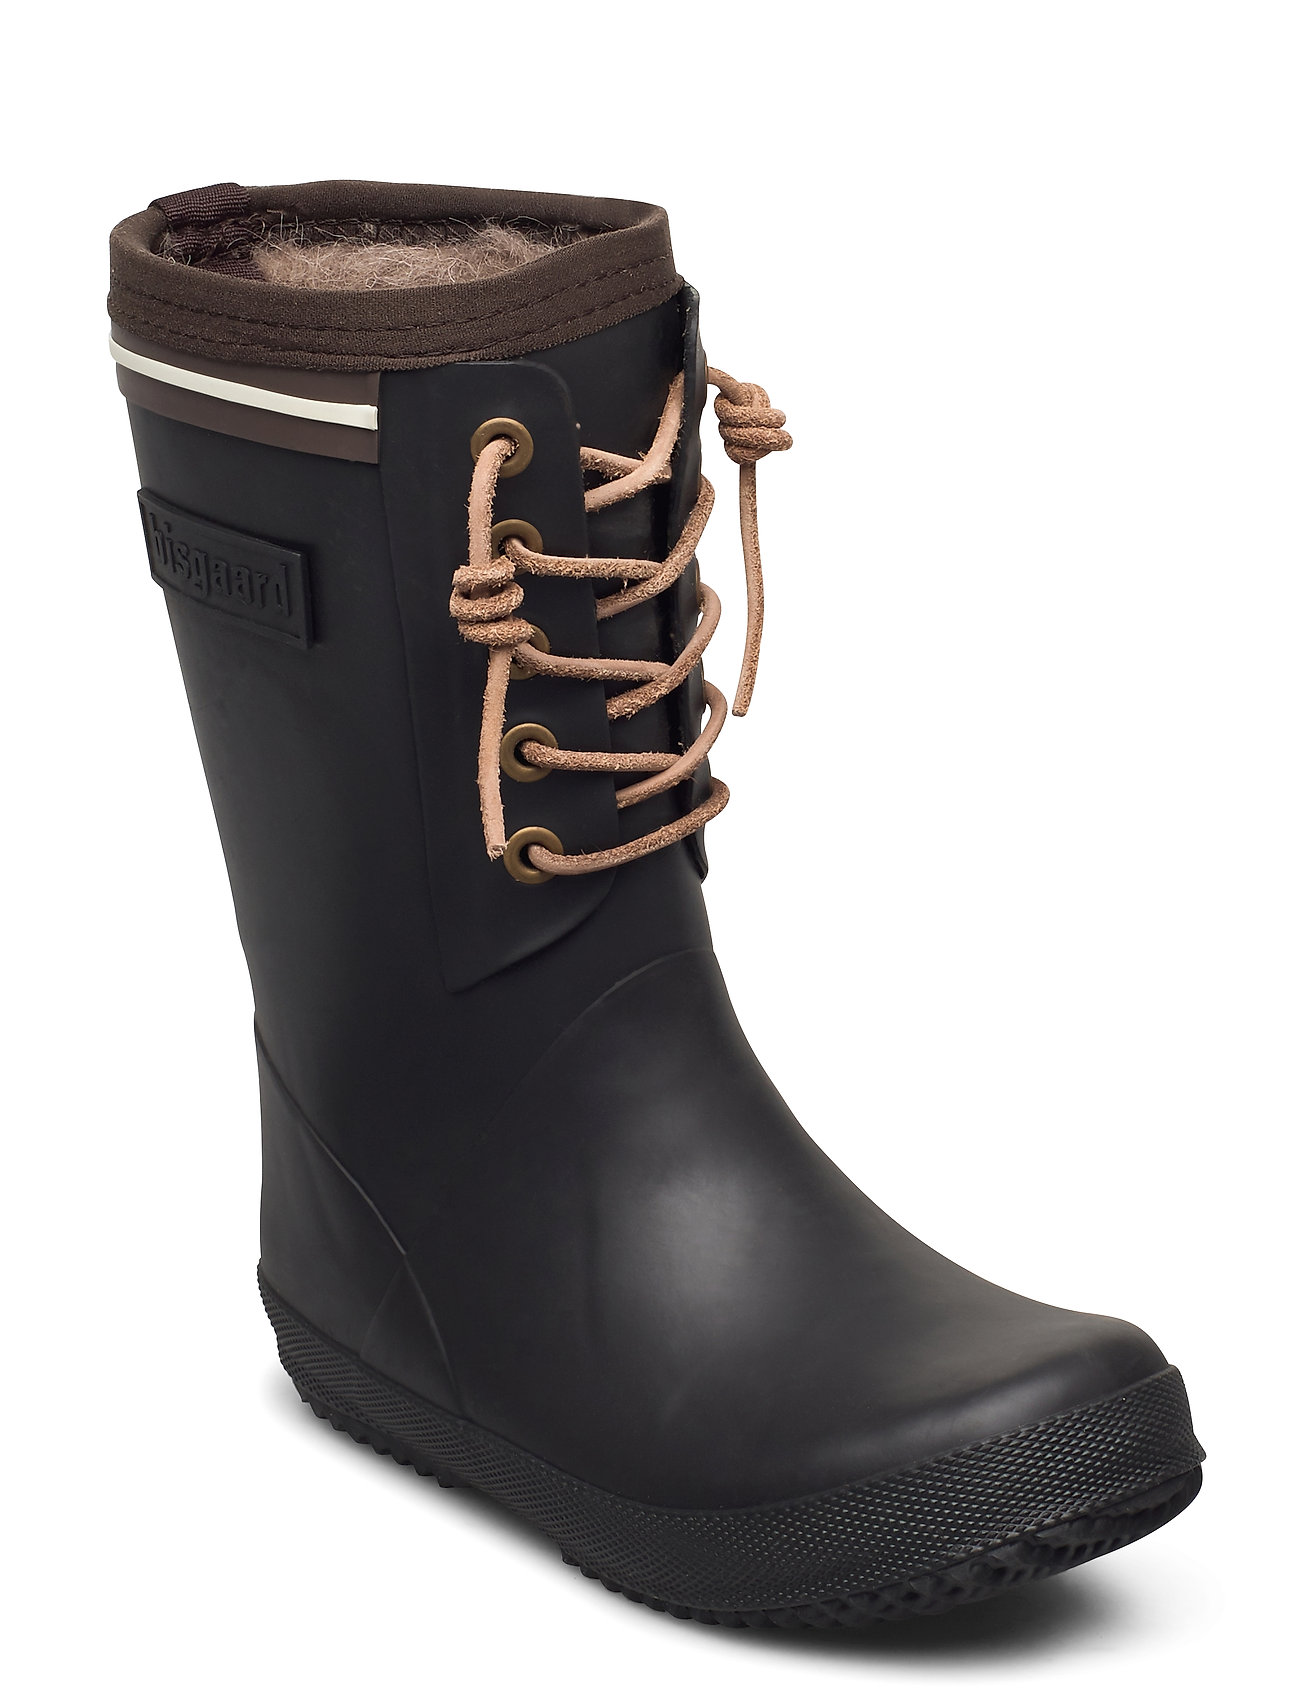 Bisgaard Lace Thermo Shoes Rubberboots Lined Rubberboots Musta Bisgaard